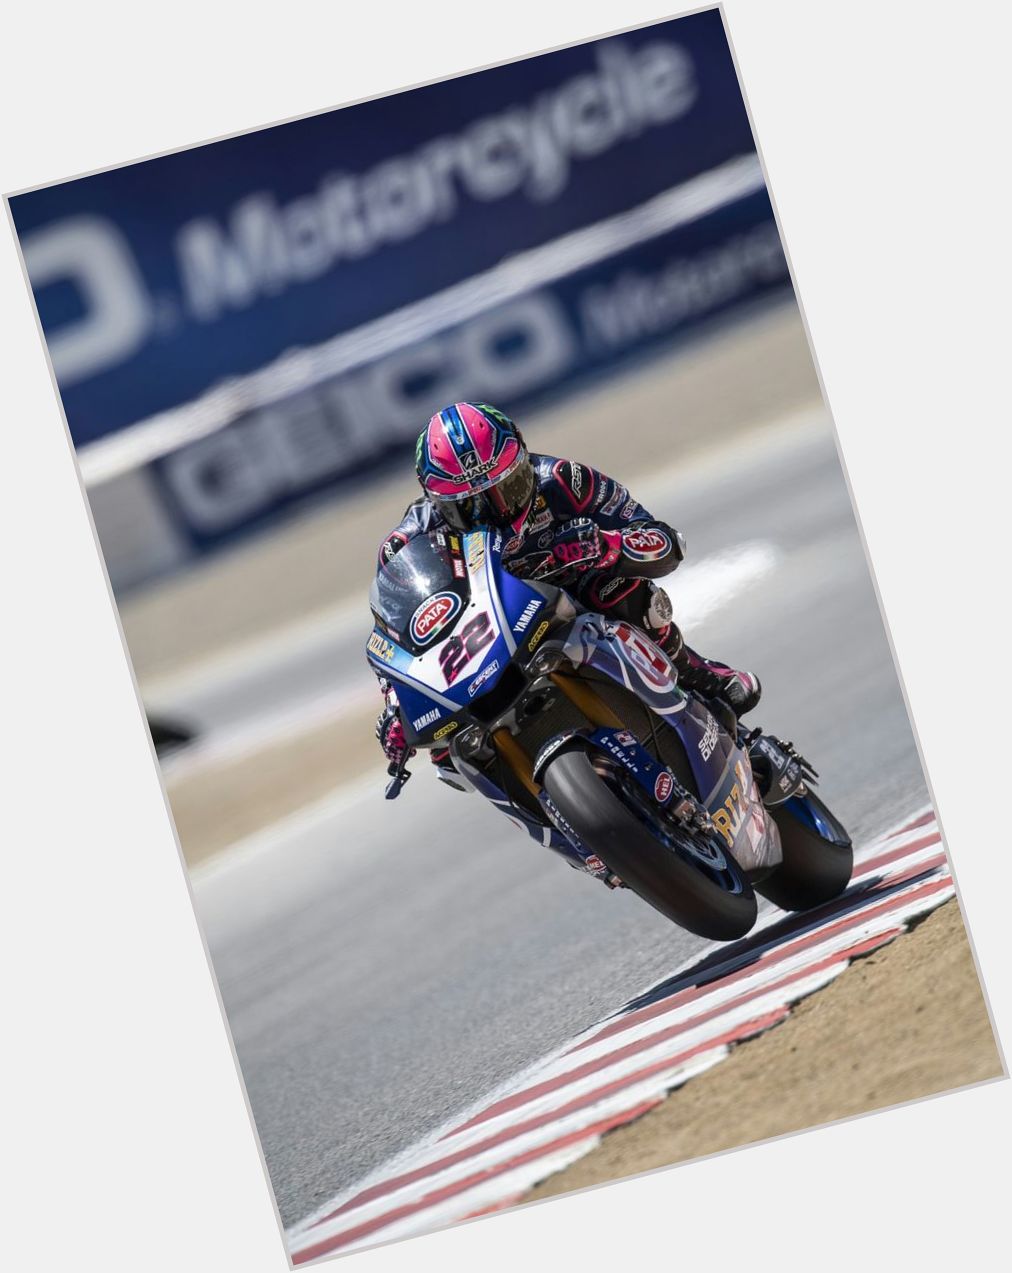 Alex Lowes dating 2